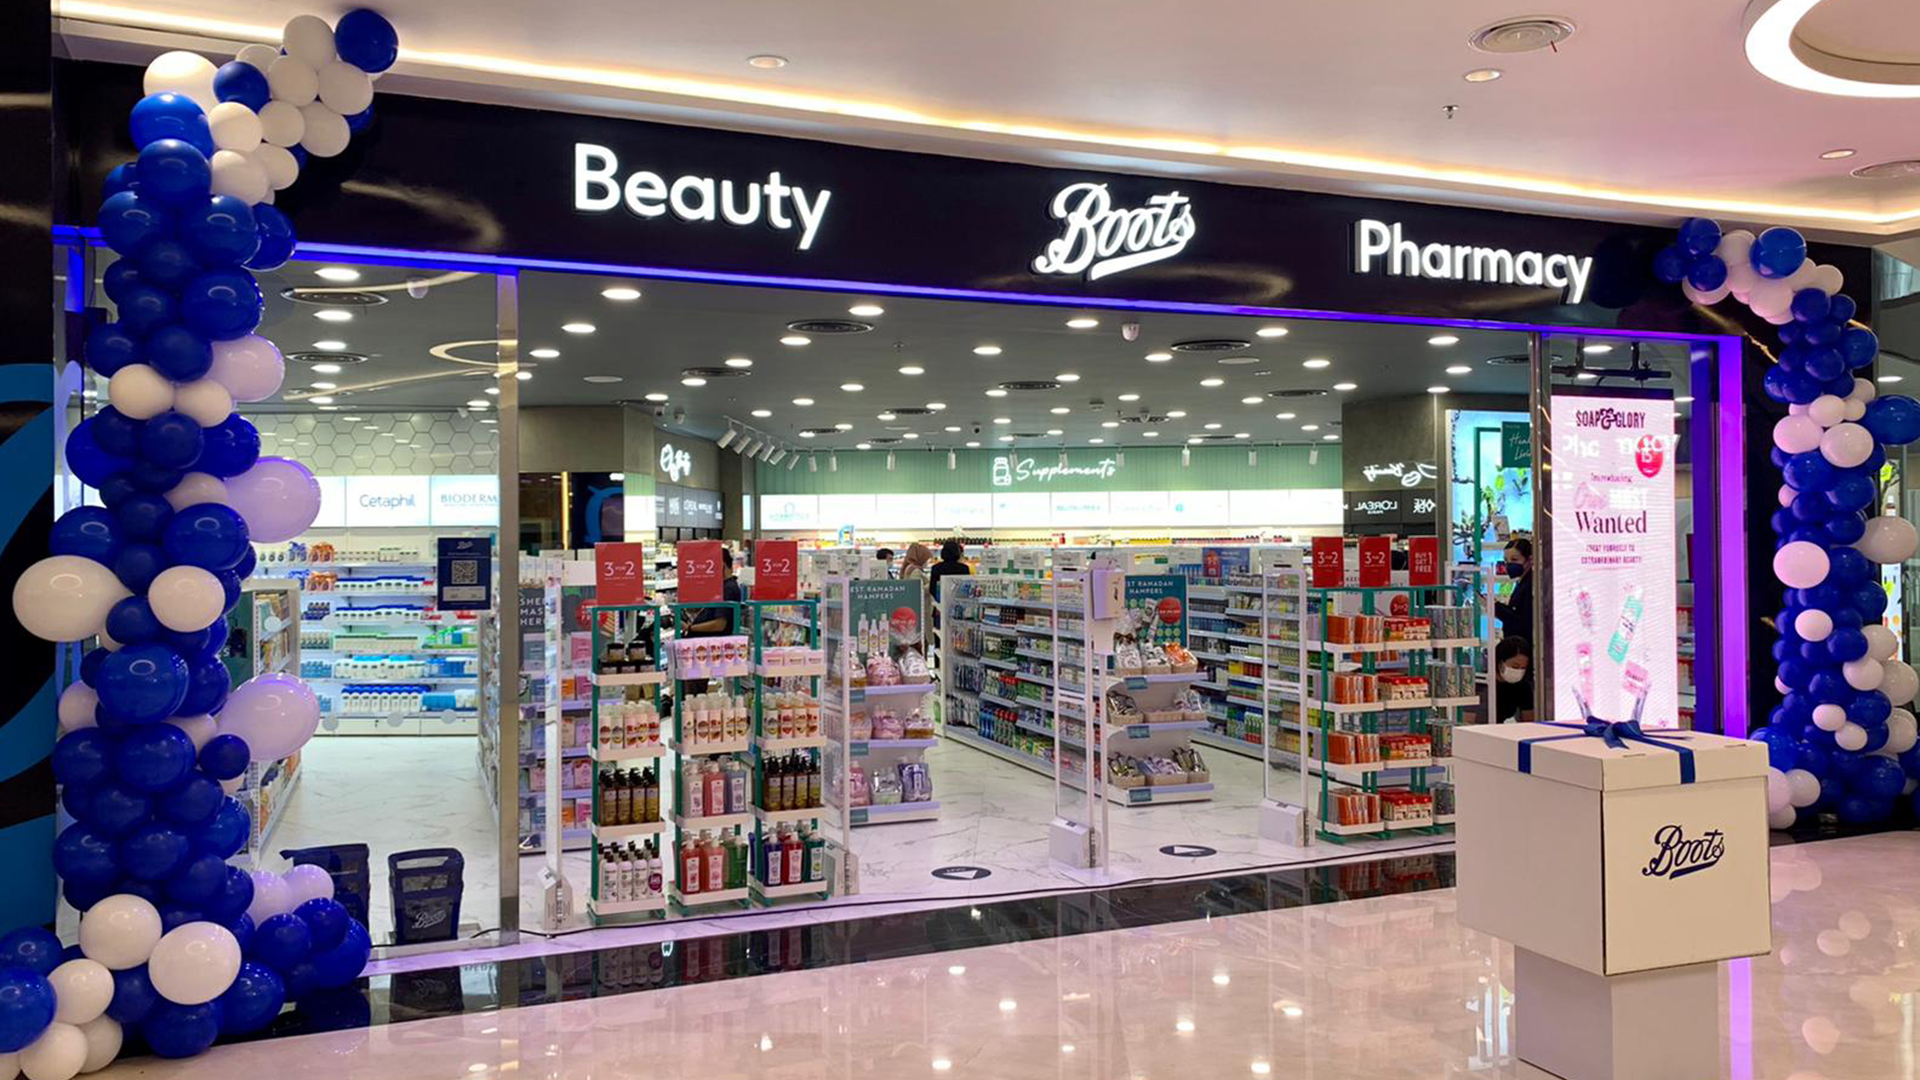 Entrance of the Boots Indonesia Store